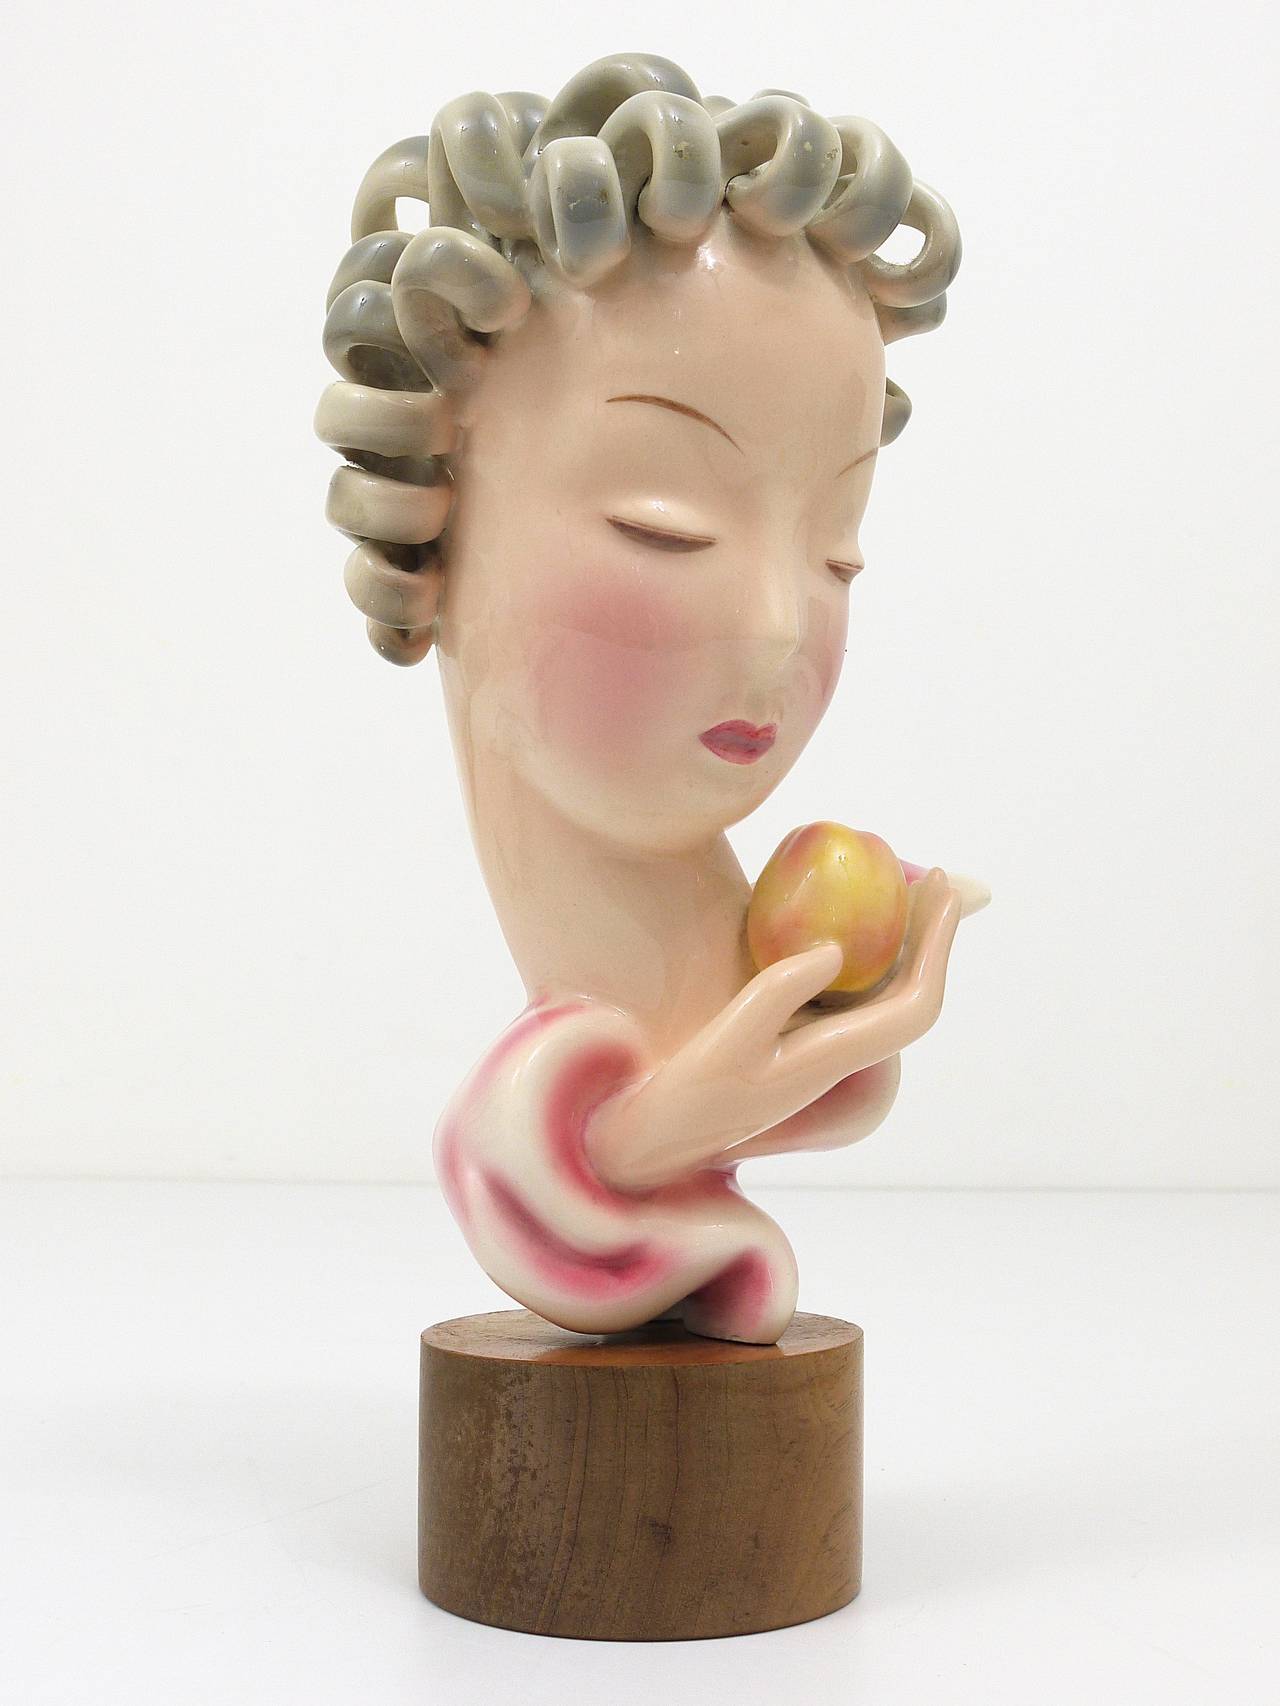 A beautiful and rare Art Deco porcelain bust on a wooden base. Eve with apple, model #6774, designed by Rudolph Knorlein, executed in the 1930s by Friedrich Goldscheider Vienna, Austria. Marked and numbered. In excellent condition.